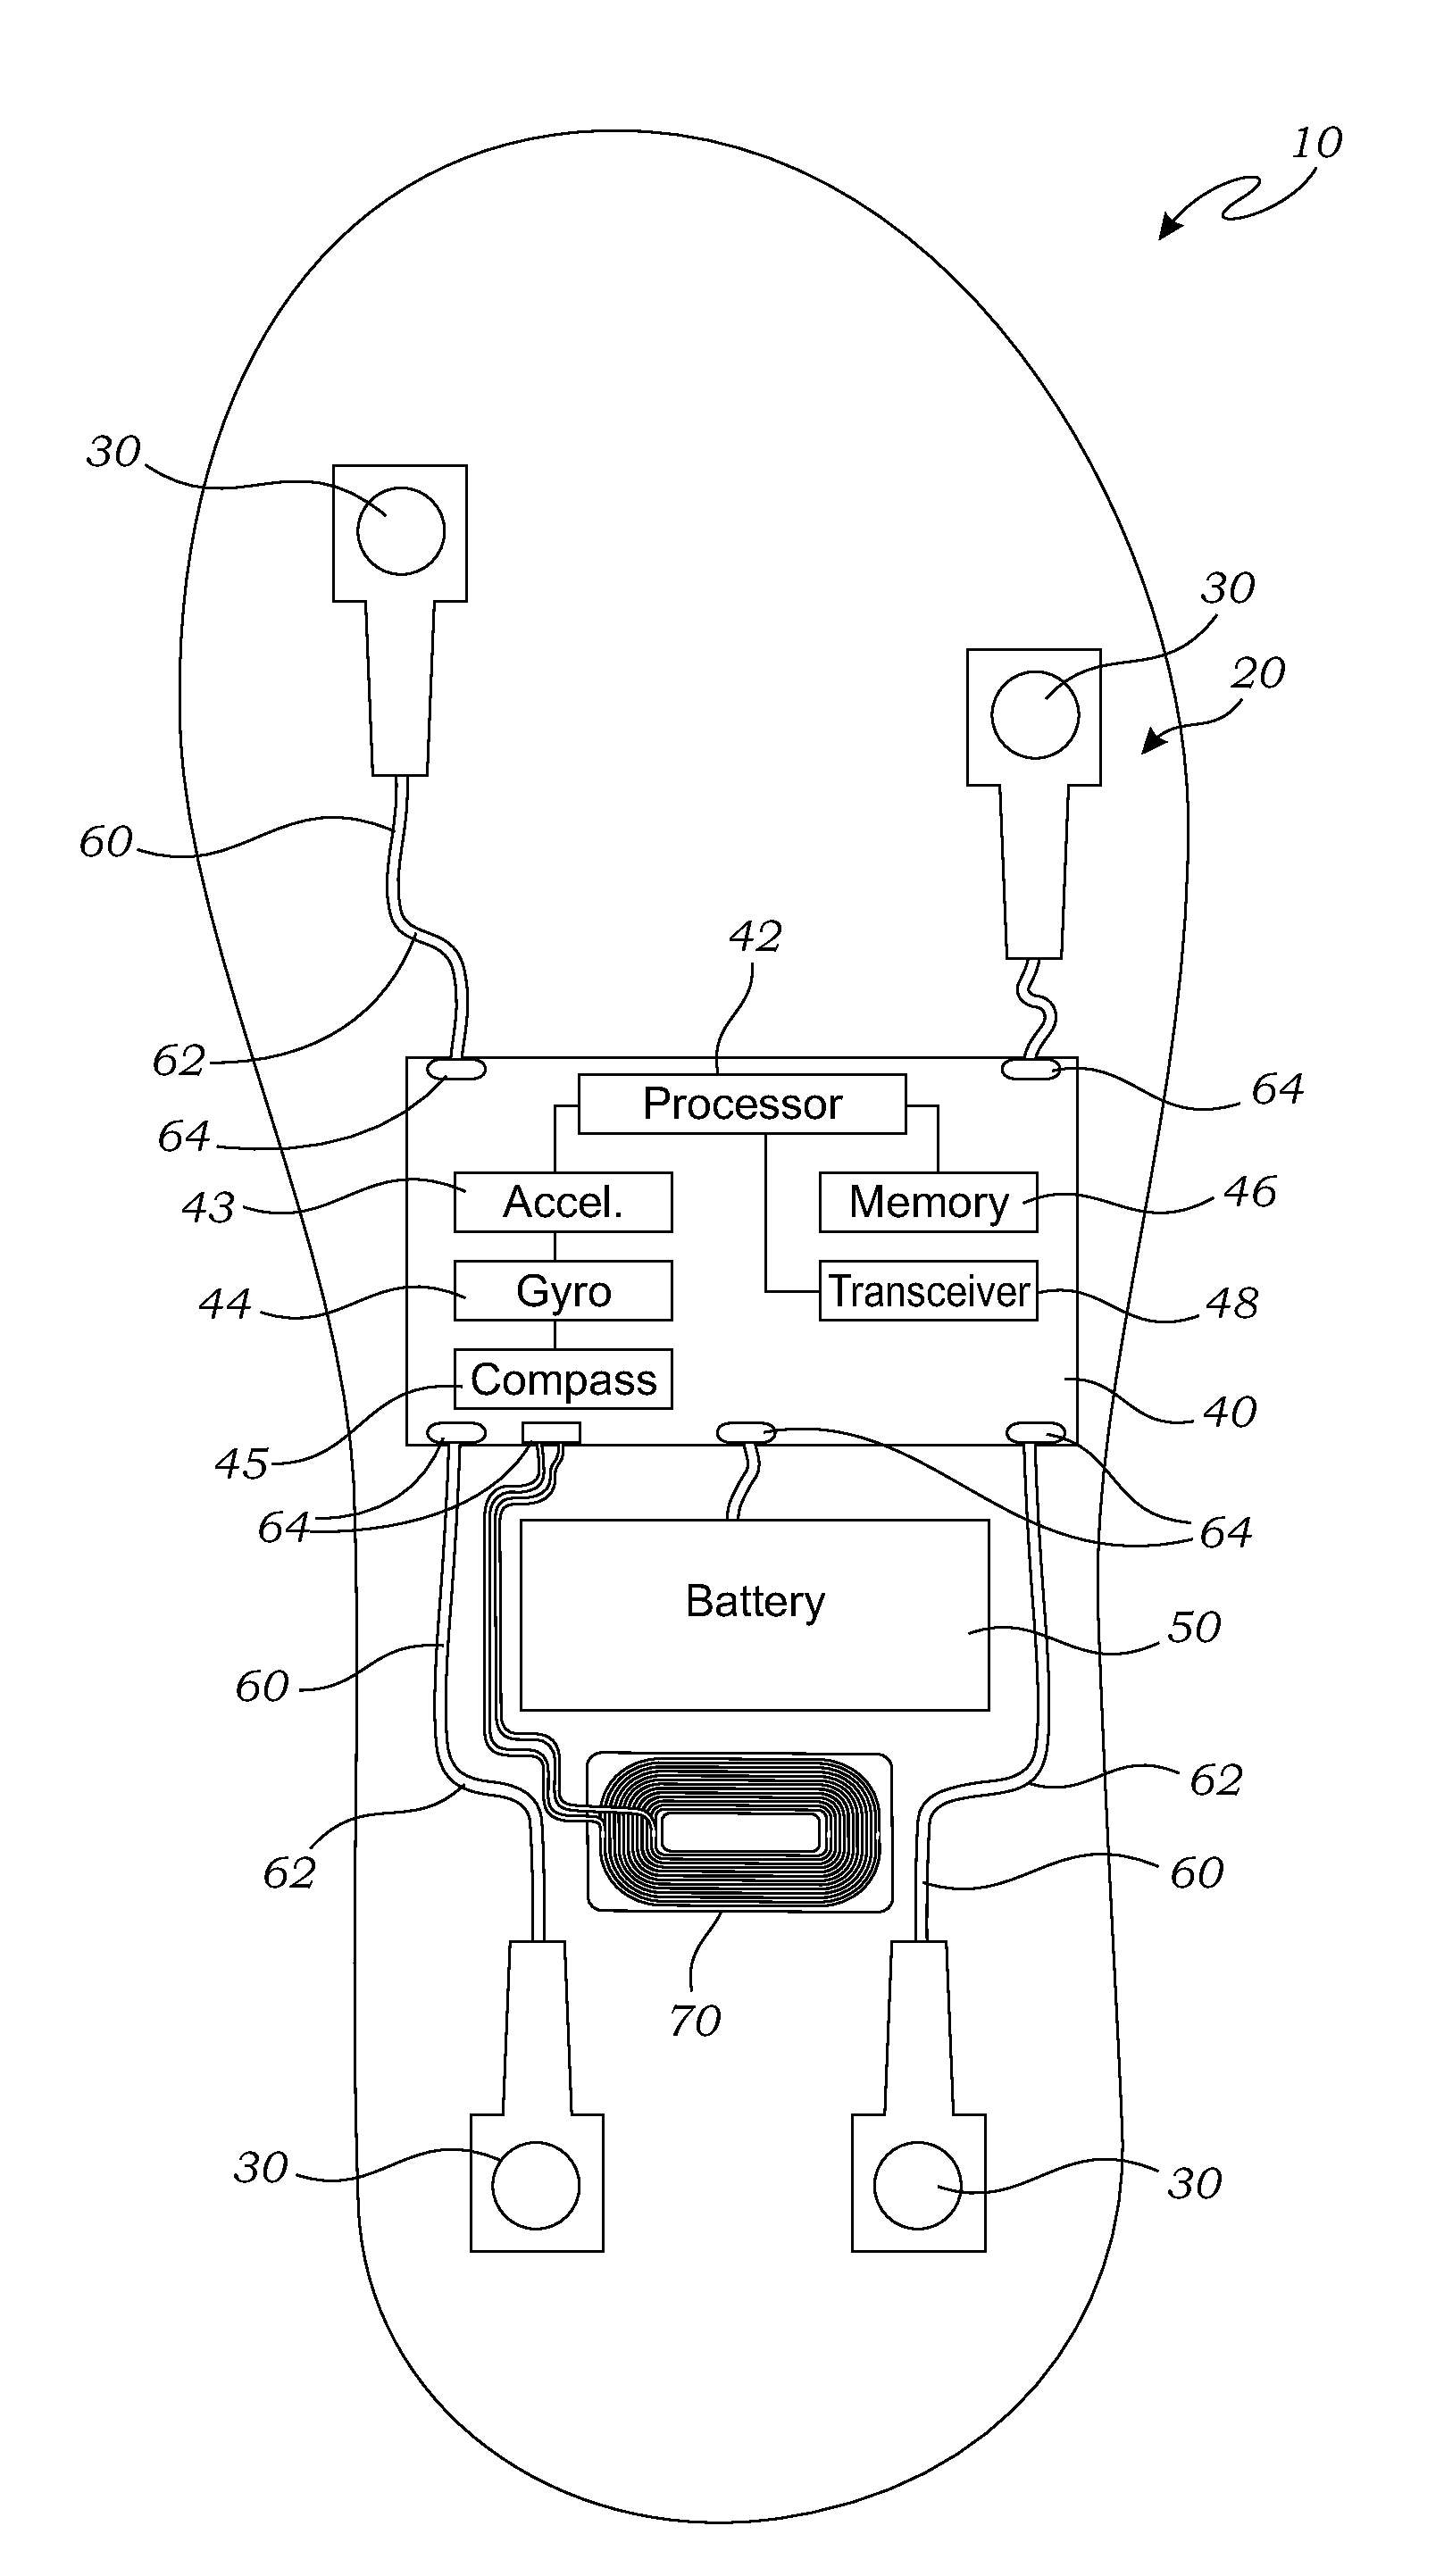 System and method for monitoring power applied to a bicycle